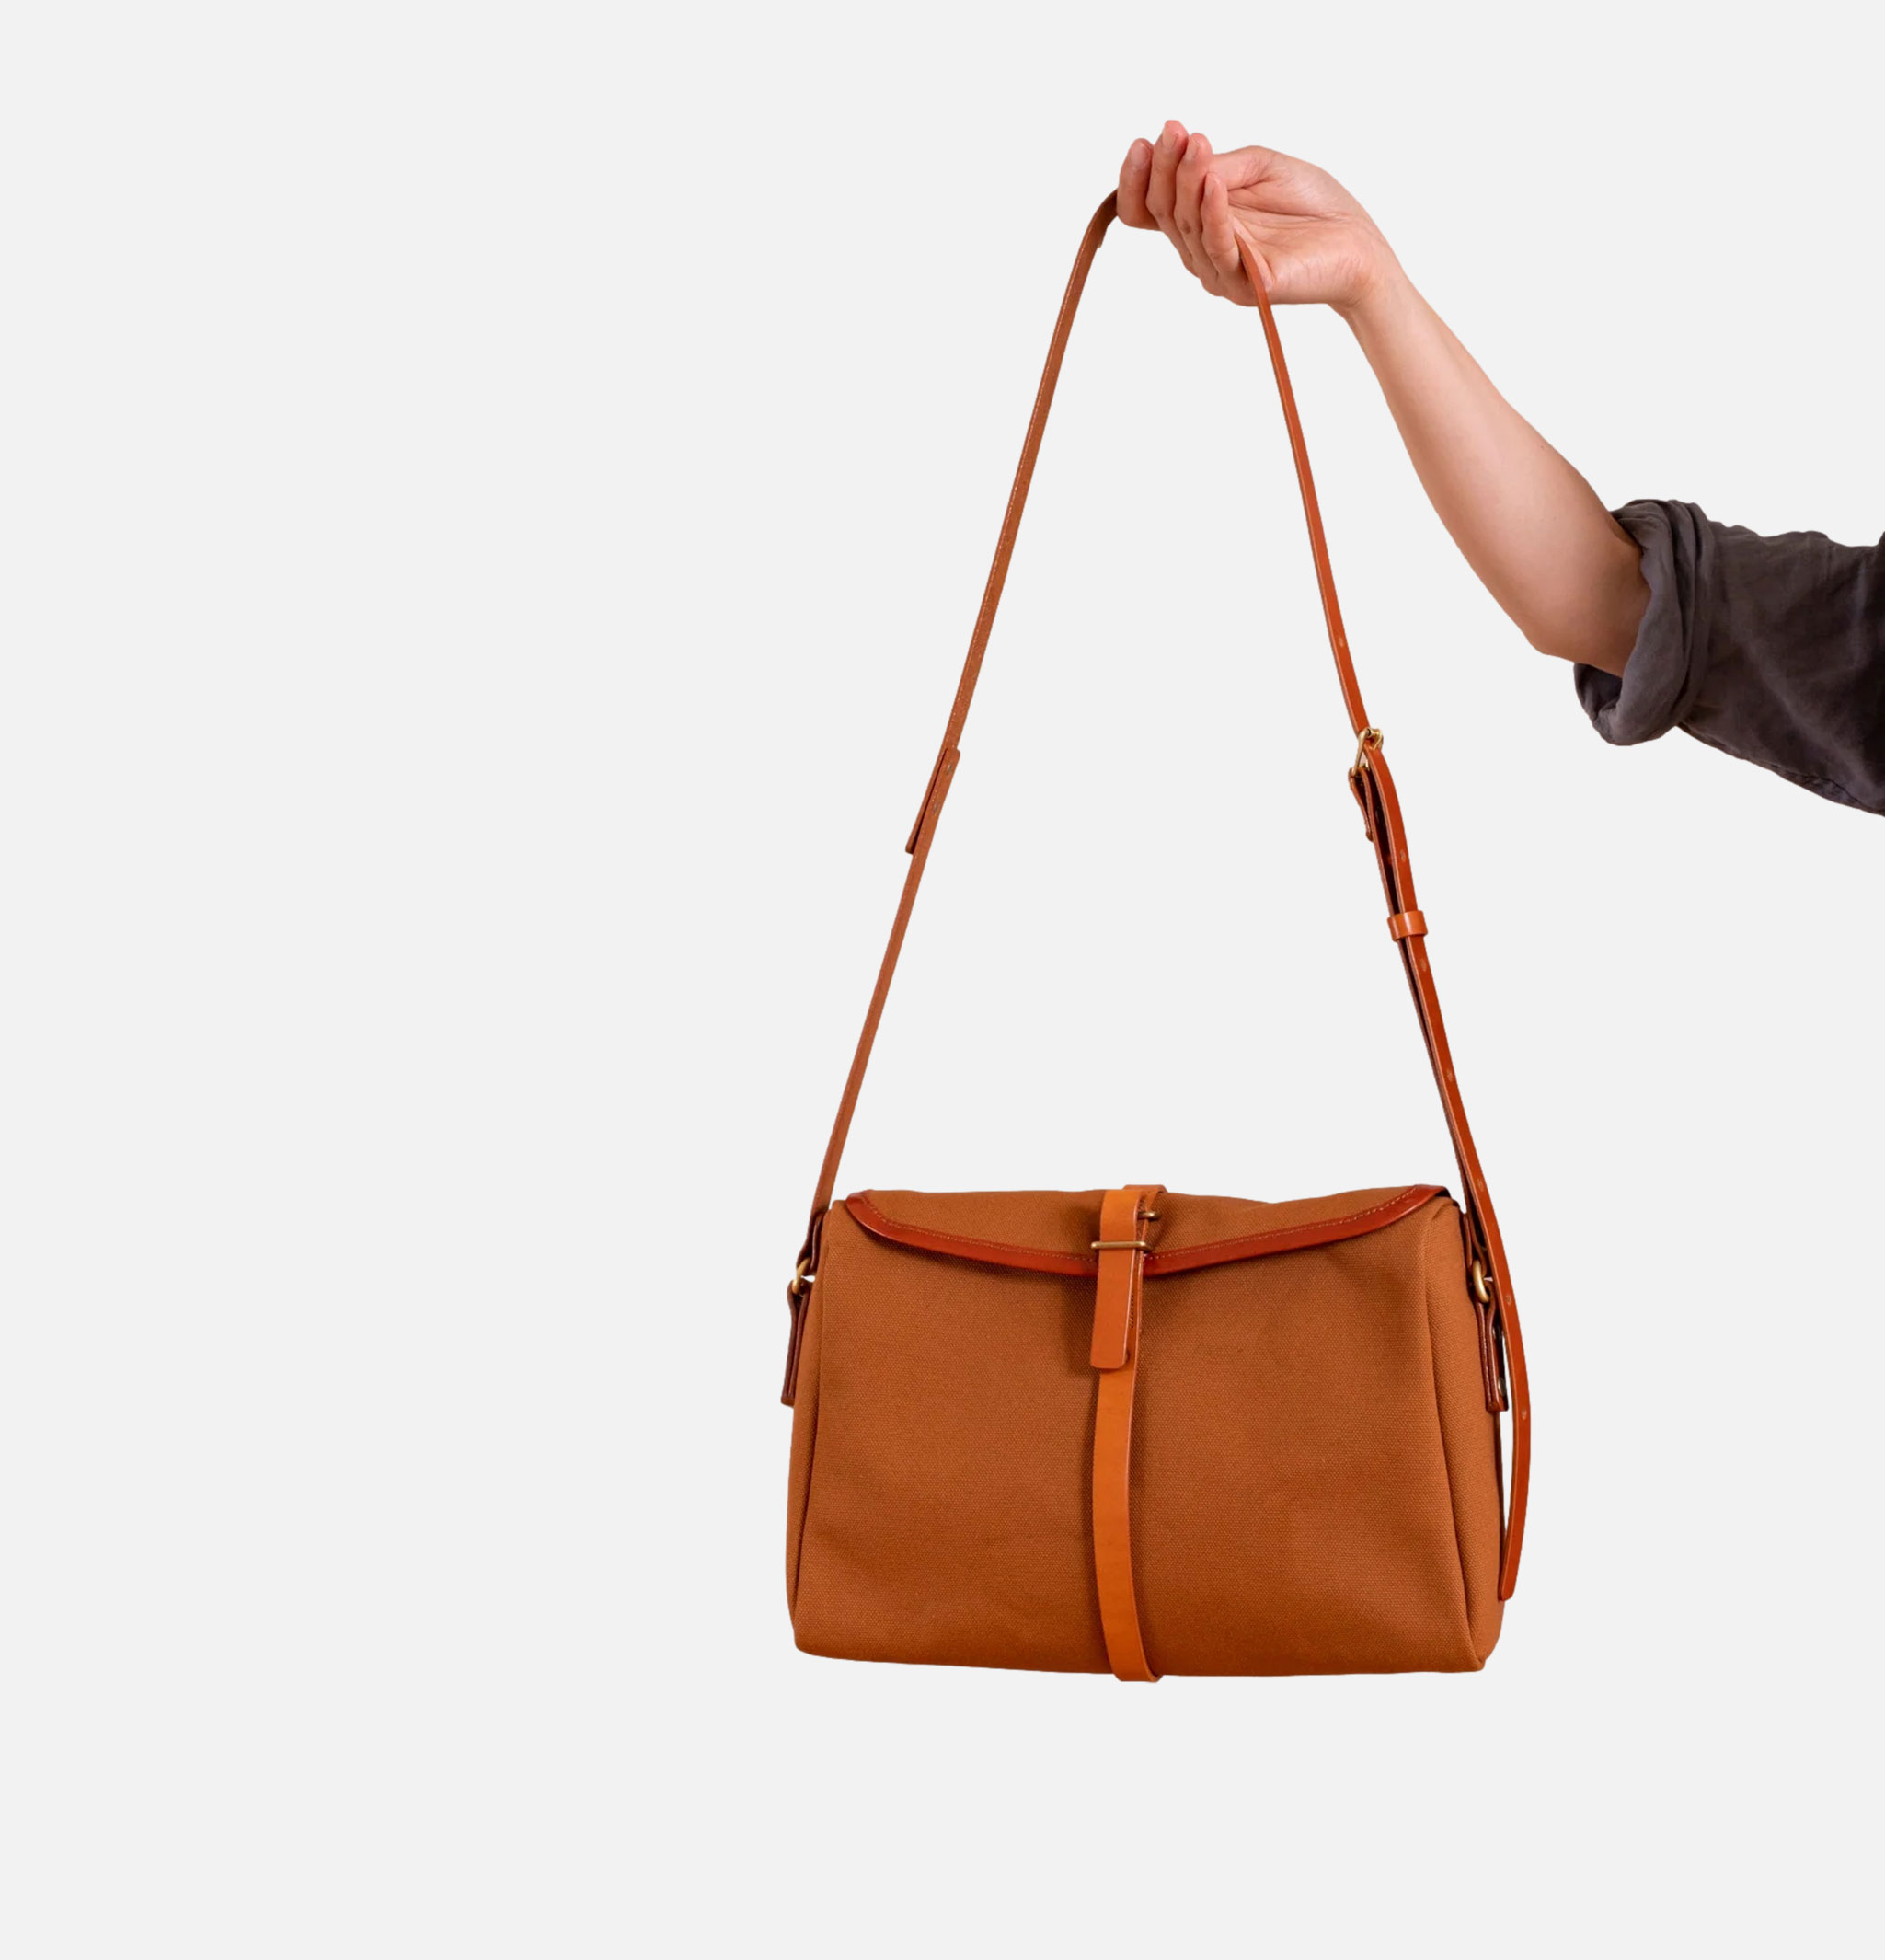 Persimmon & Tan Satchel from Southern Field